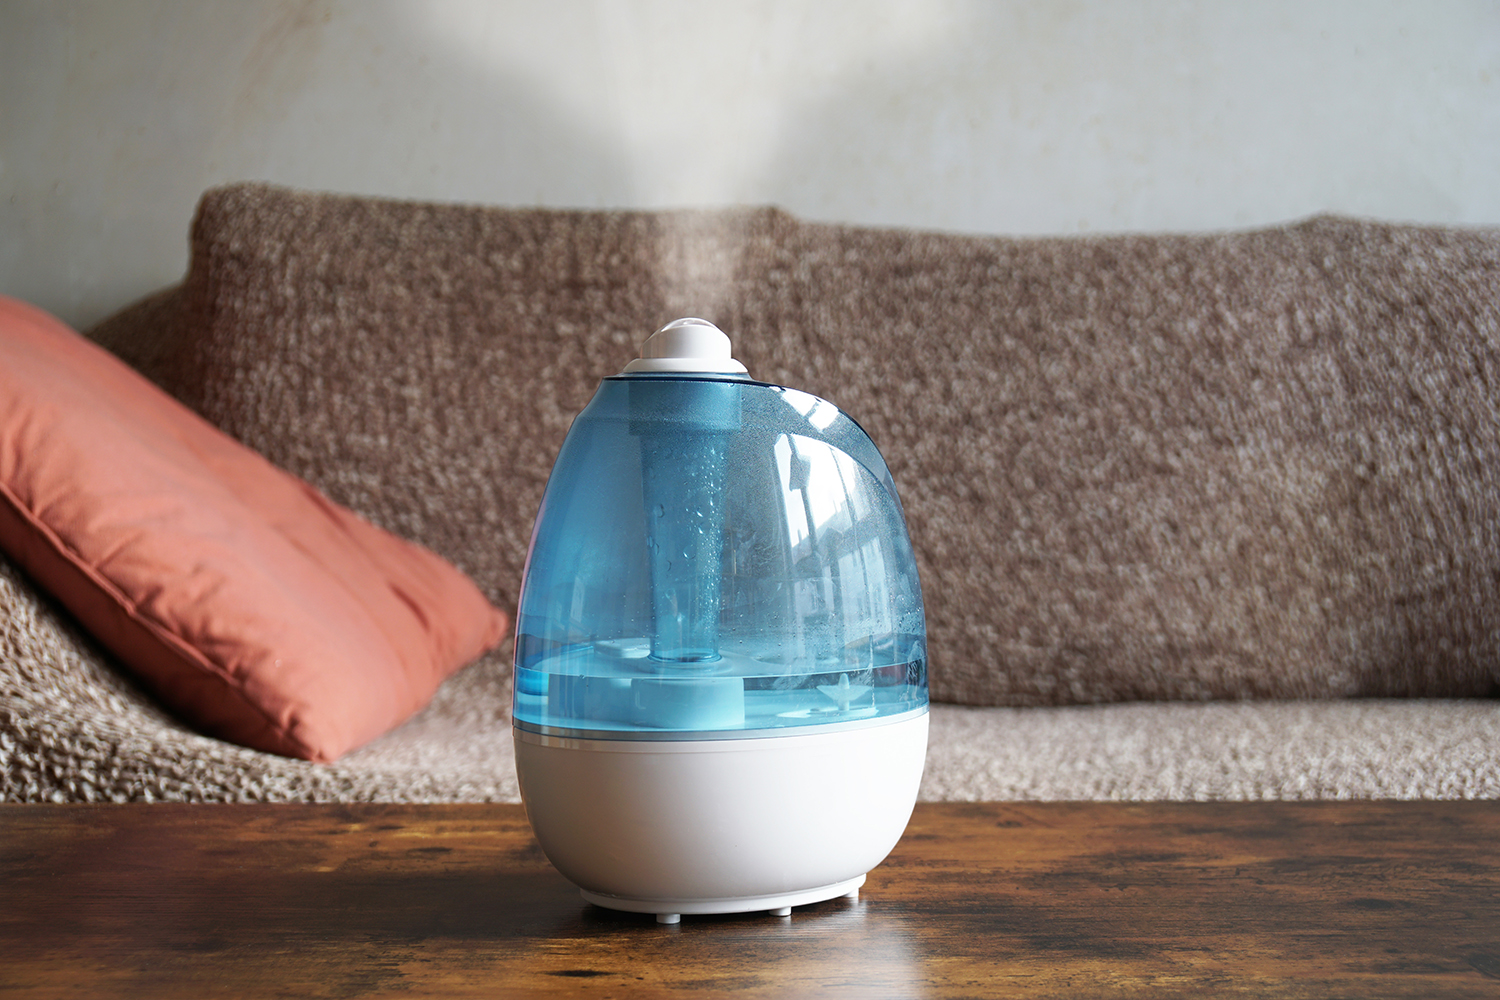 Evaporative vs. Ultrasonic Humidifiers: What's the Difference?